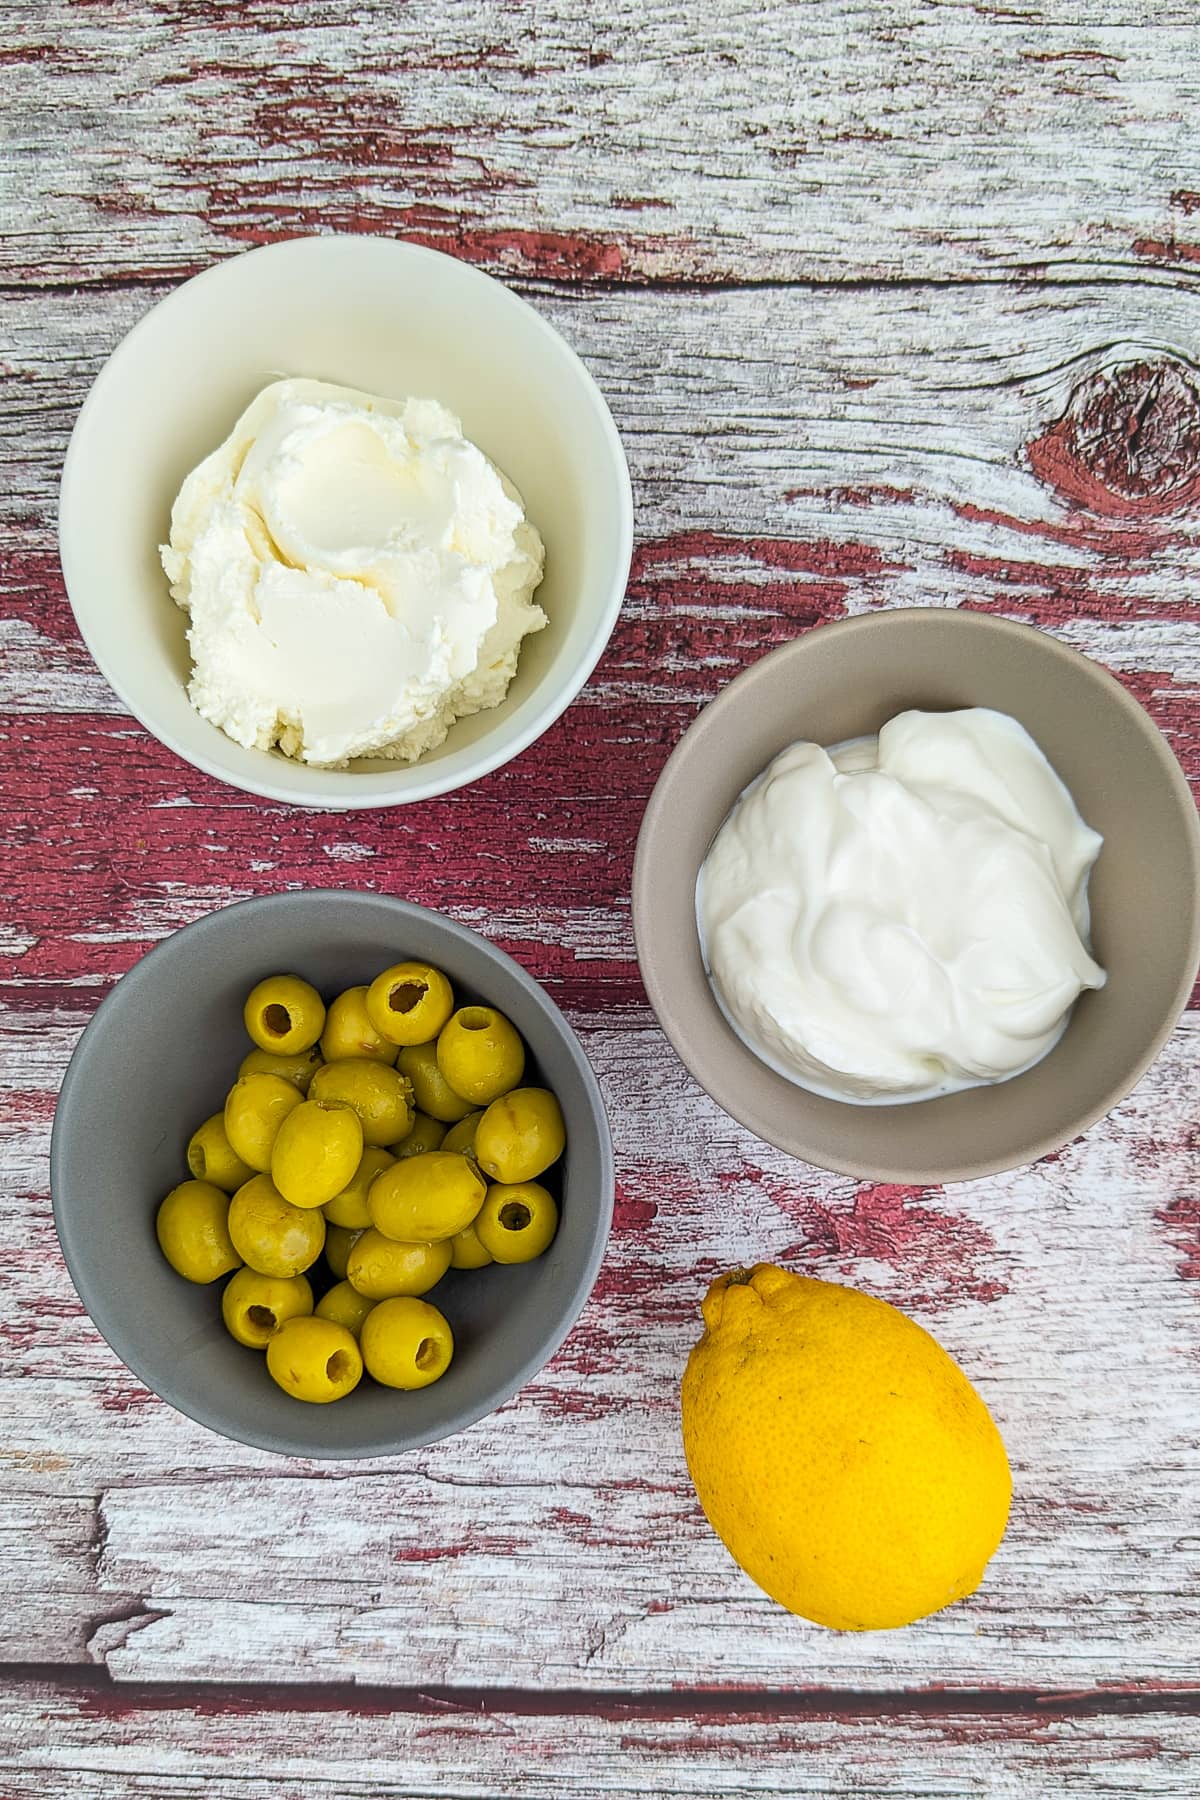 Top view of Greek yogurt, cream cheese, olives and lemon on a rustic wooden table.